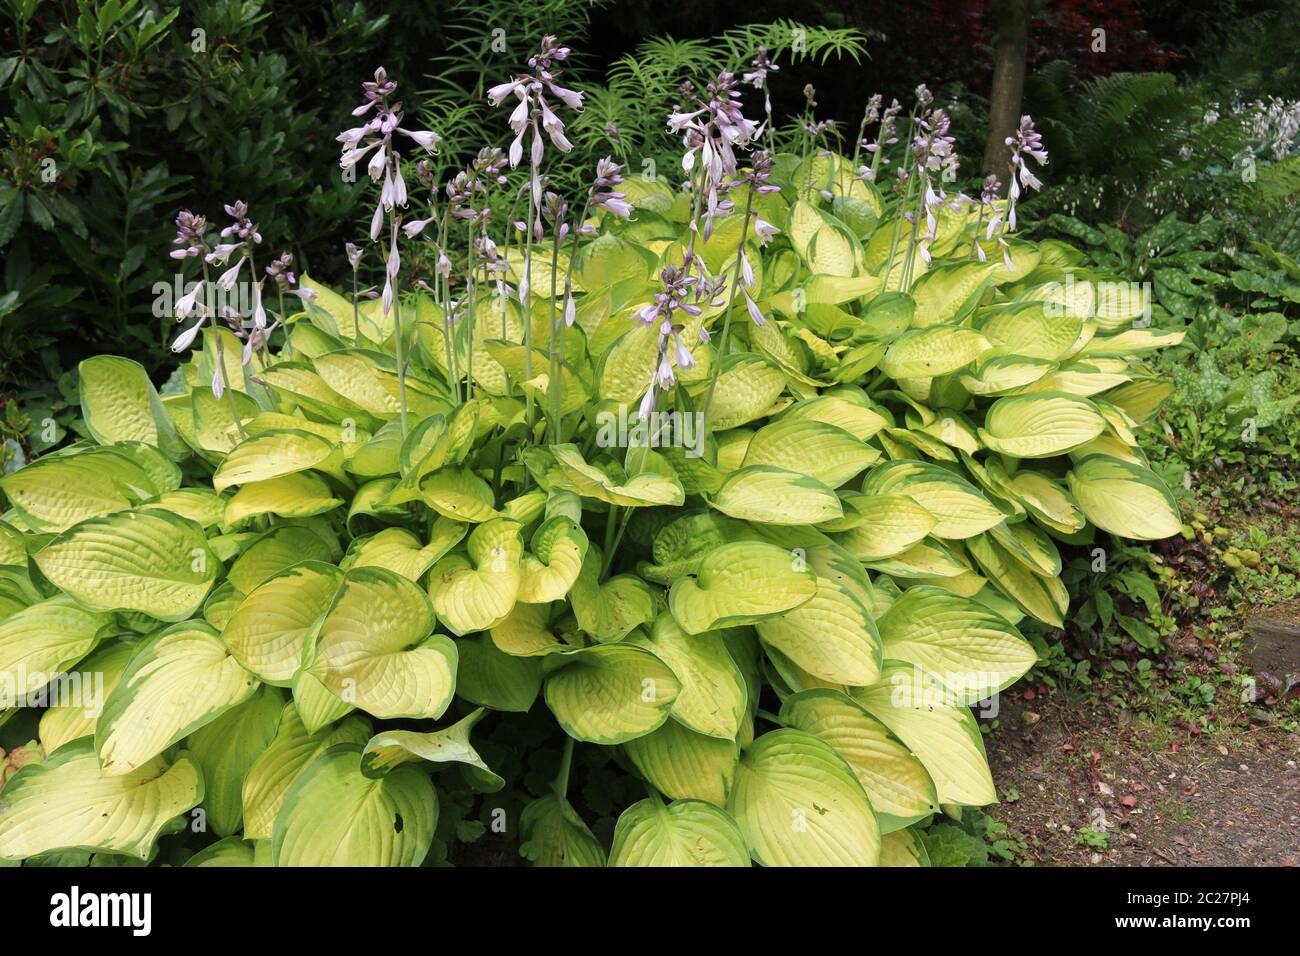 Plantain lilies (Hosta) growing in partial shade with pale lilac flowers and yellow leaves with green margins with ferns and shrubs in the background. Stock Photo